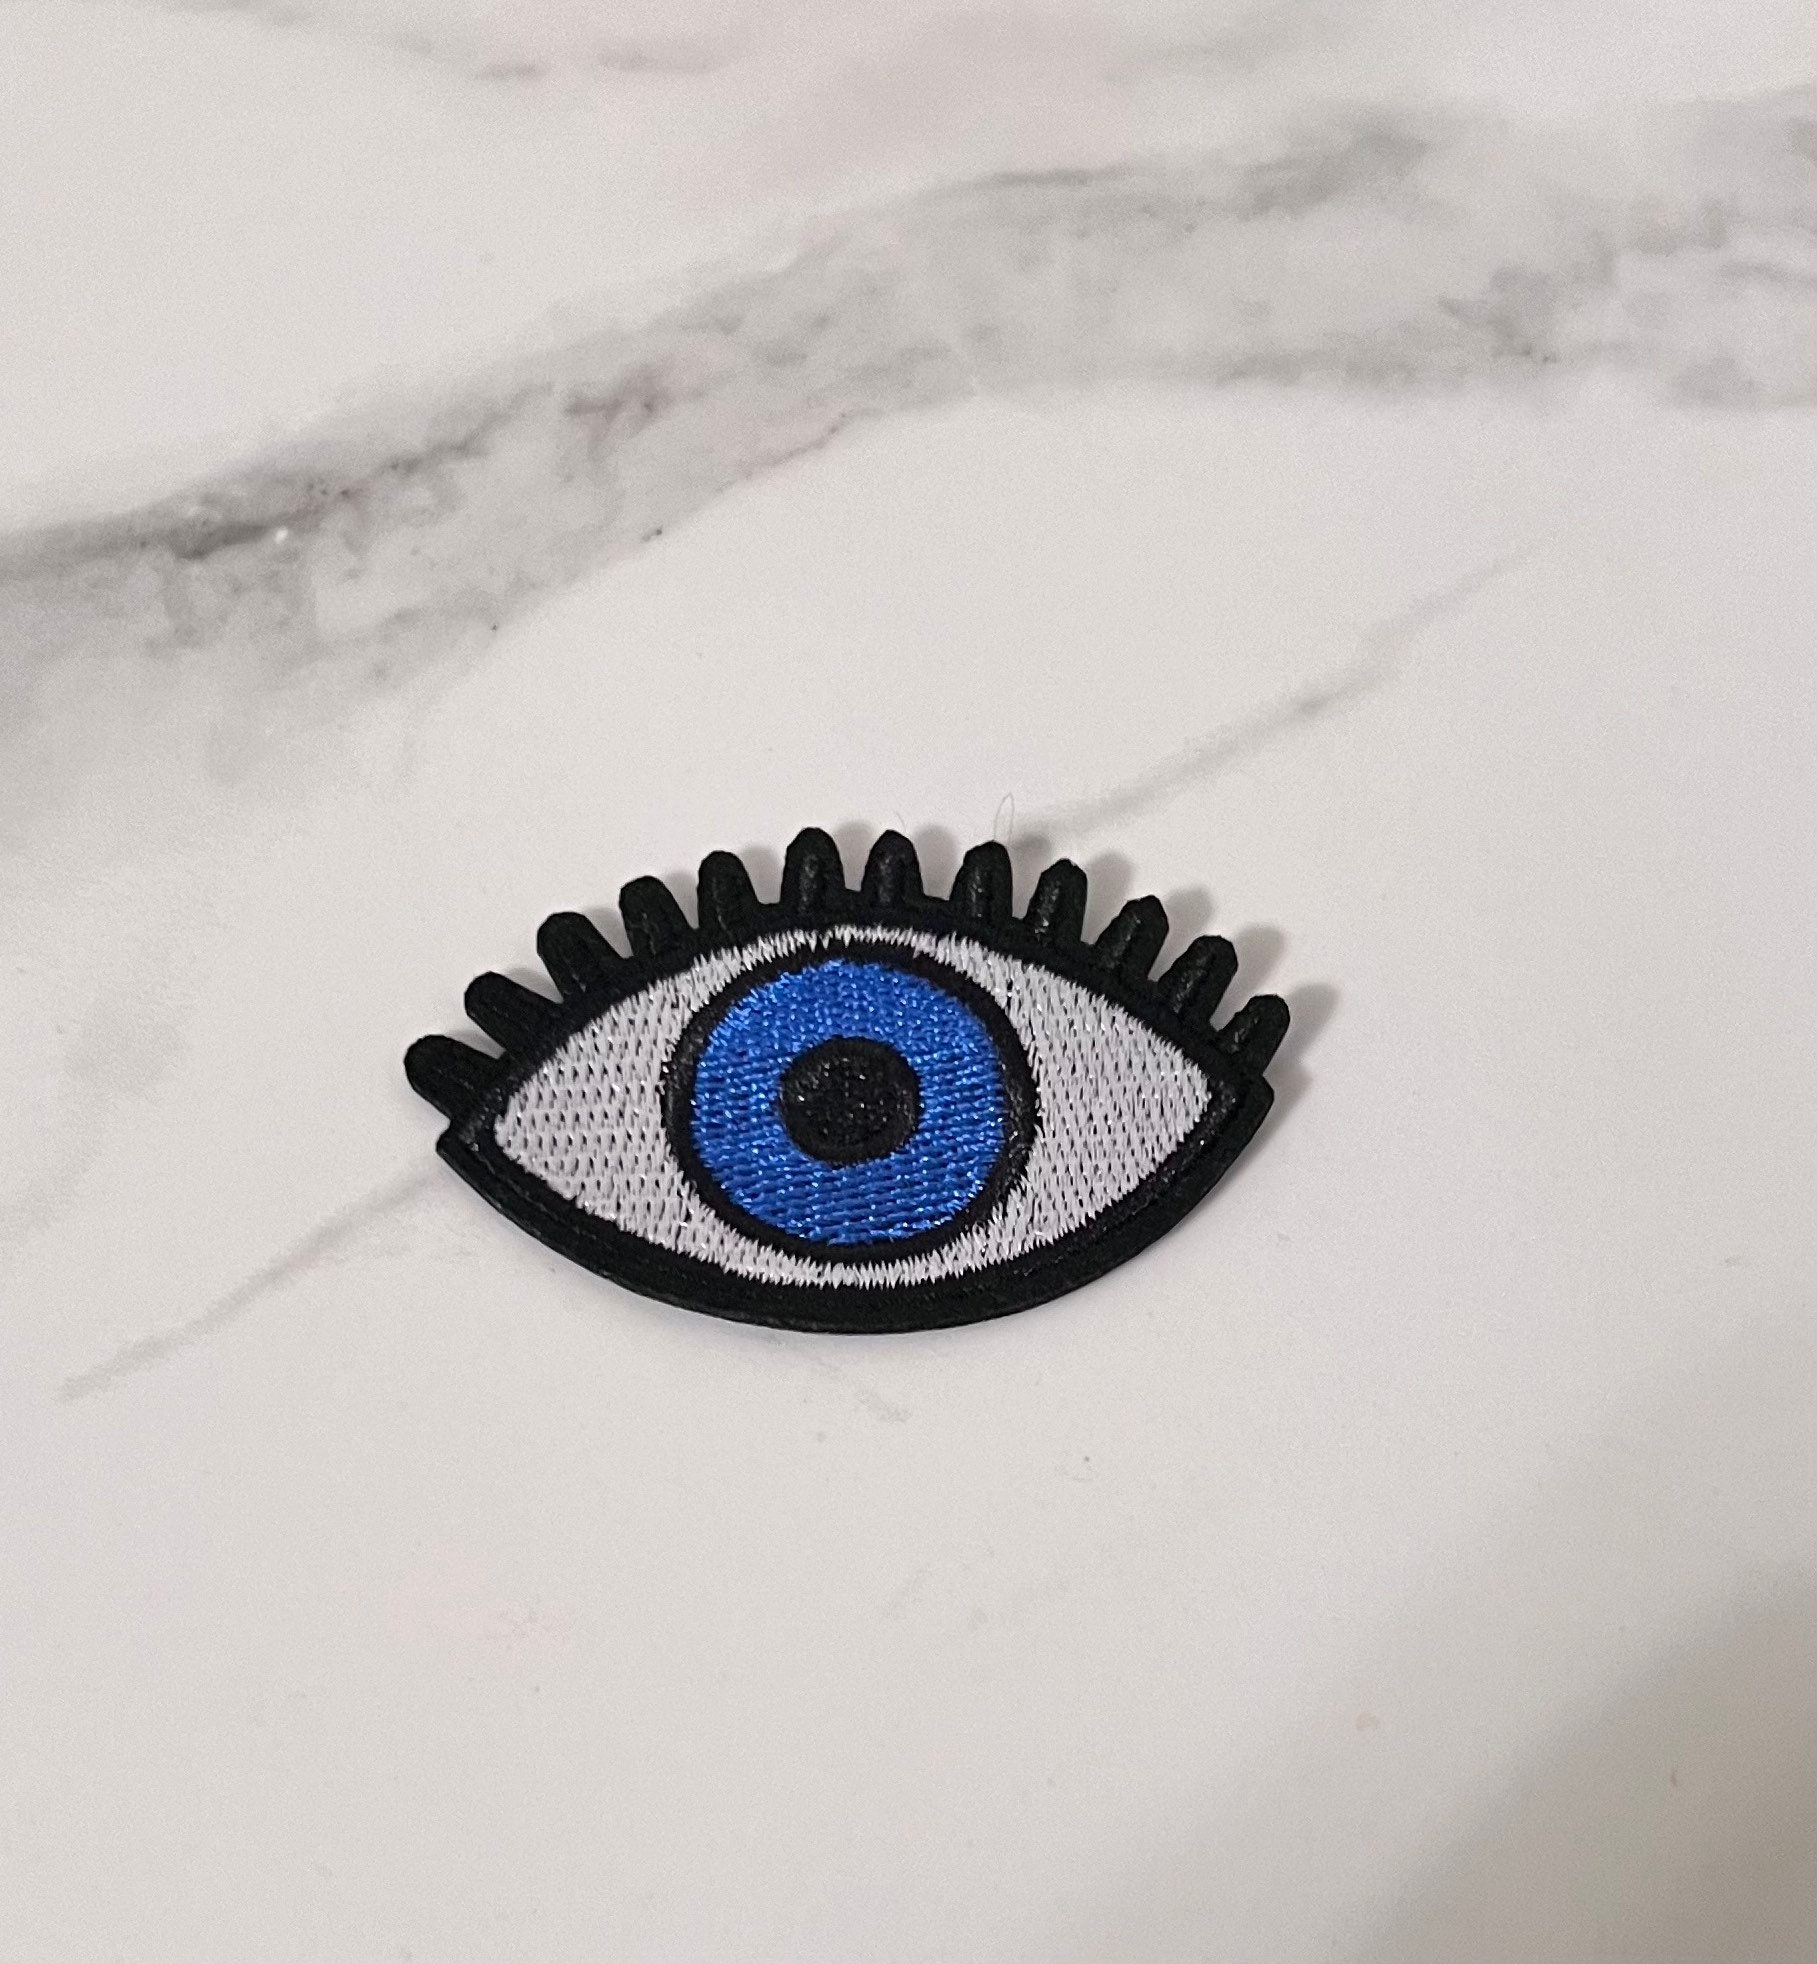 BLOODSHOT EYE IRON Patch Embroidery Cute Pop Culture Funny NEW